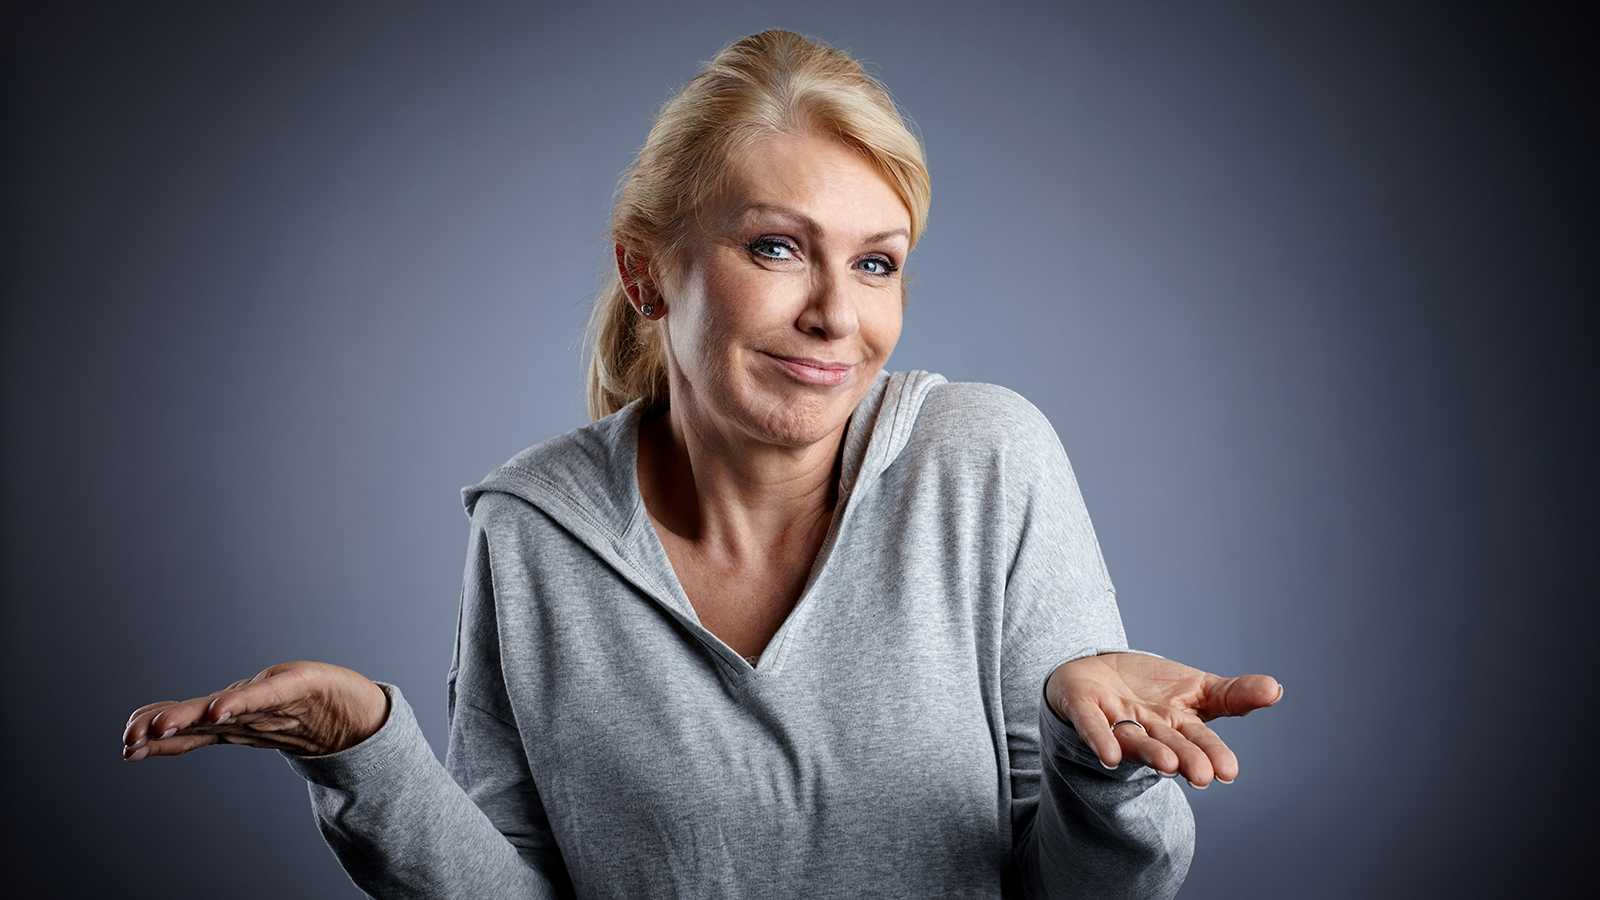 Portrait of mature woman shrugging over grey background